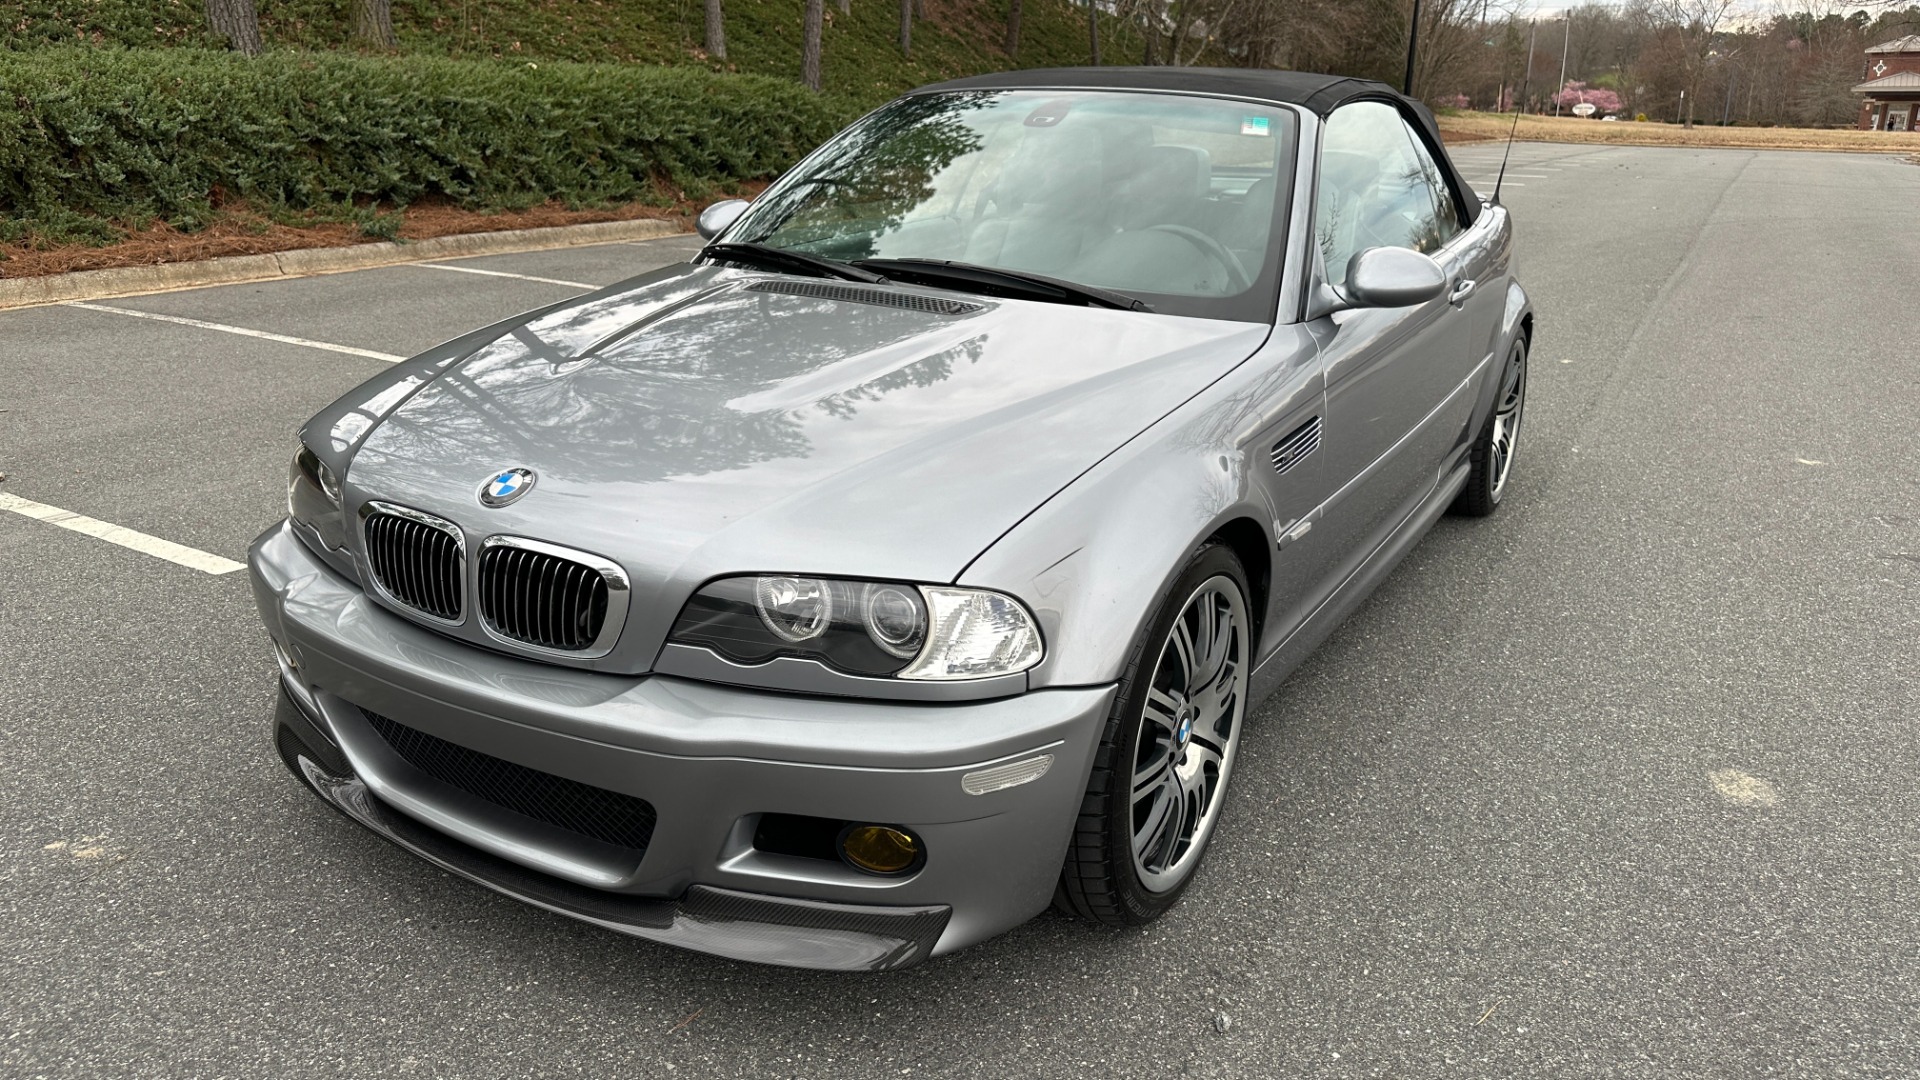 Used 2006 BMW 3 Series M3 CONVERTIBLE / SMG AUTO / LEATHER / INLINE 6CYL / CARBON FIBER for sale Sold at Formula Imports in Charlotte NC 28227 42